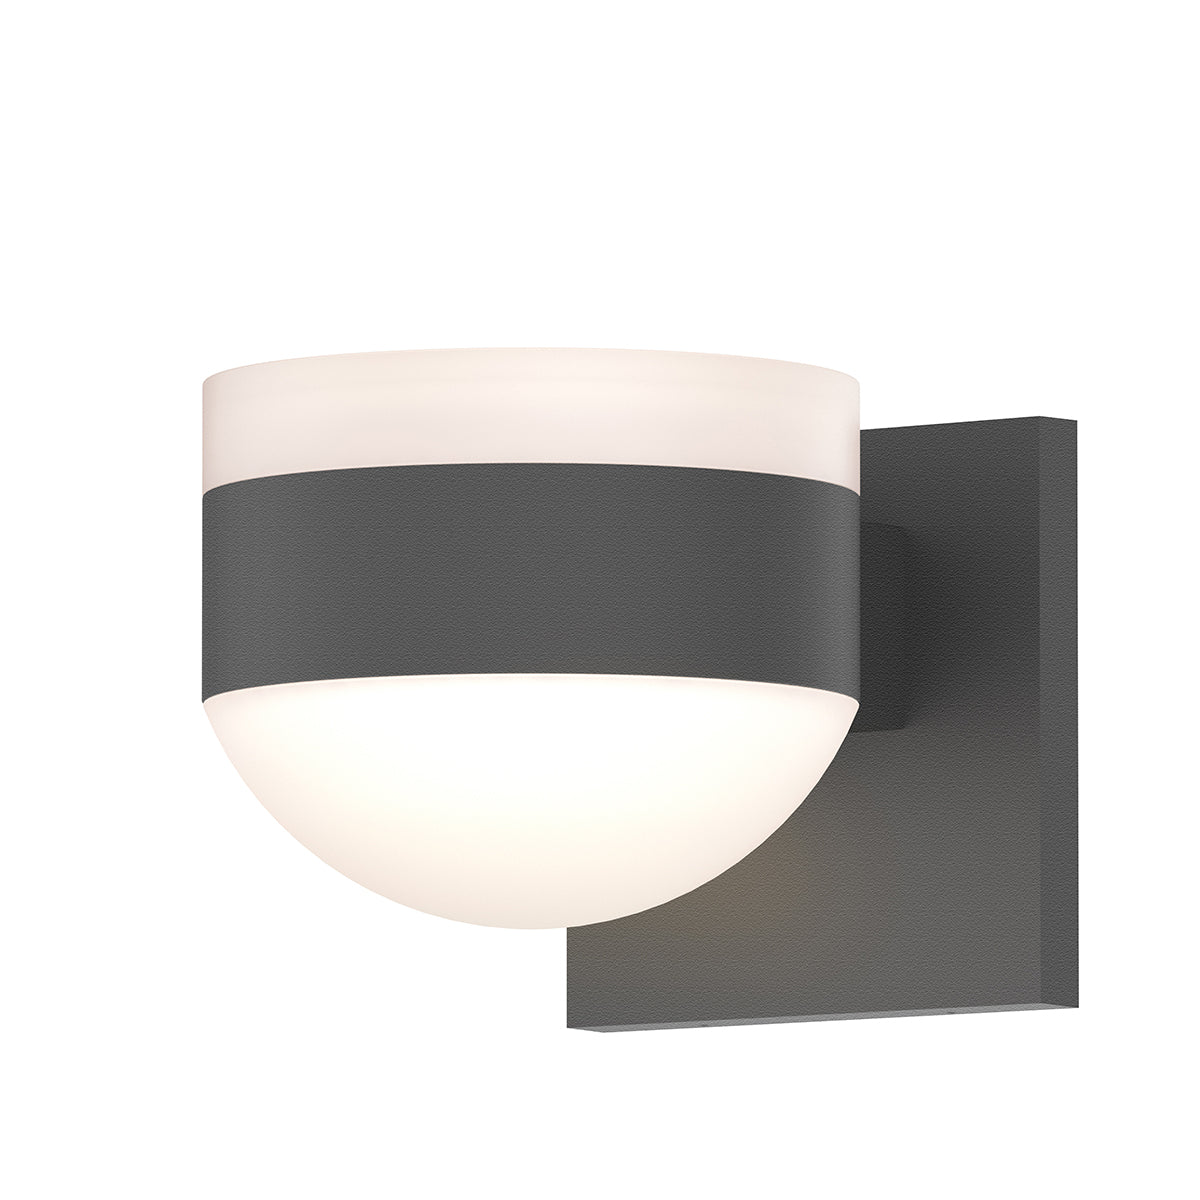 Reals Up/Down LED Sconce in Textured Gray - Lamps Expo